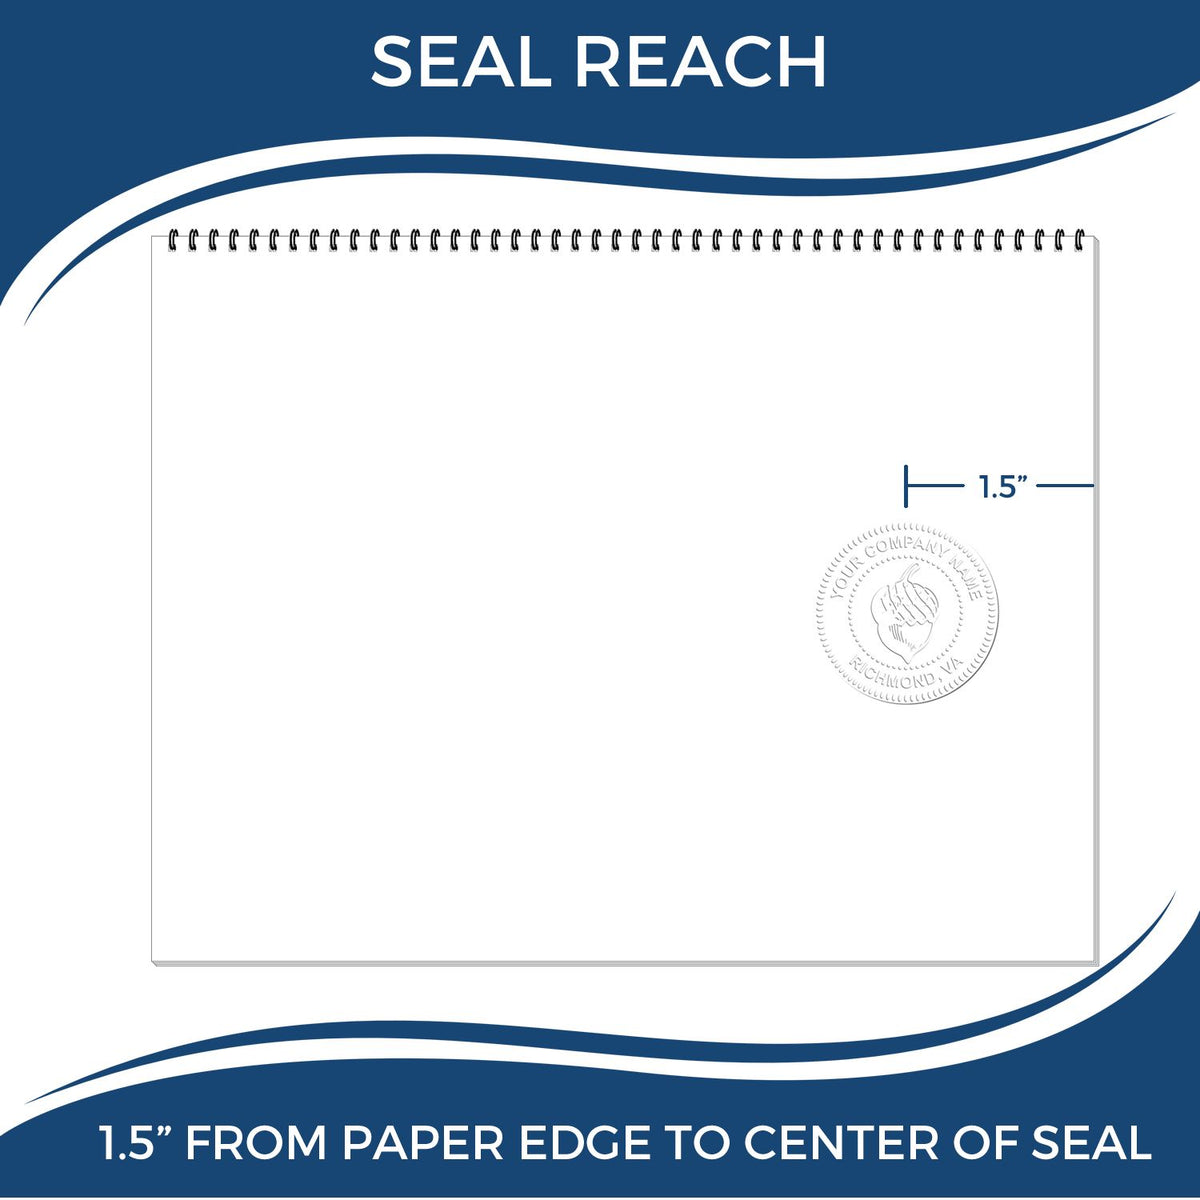 An infographic showing the seal reach which is represented by a ruler and a miniature seal image of the Hybrid West Virginia Landscape Architect Seal